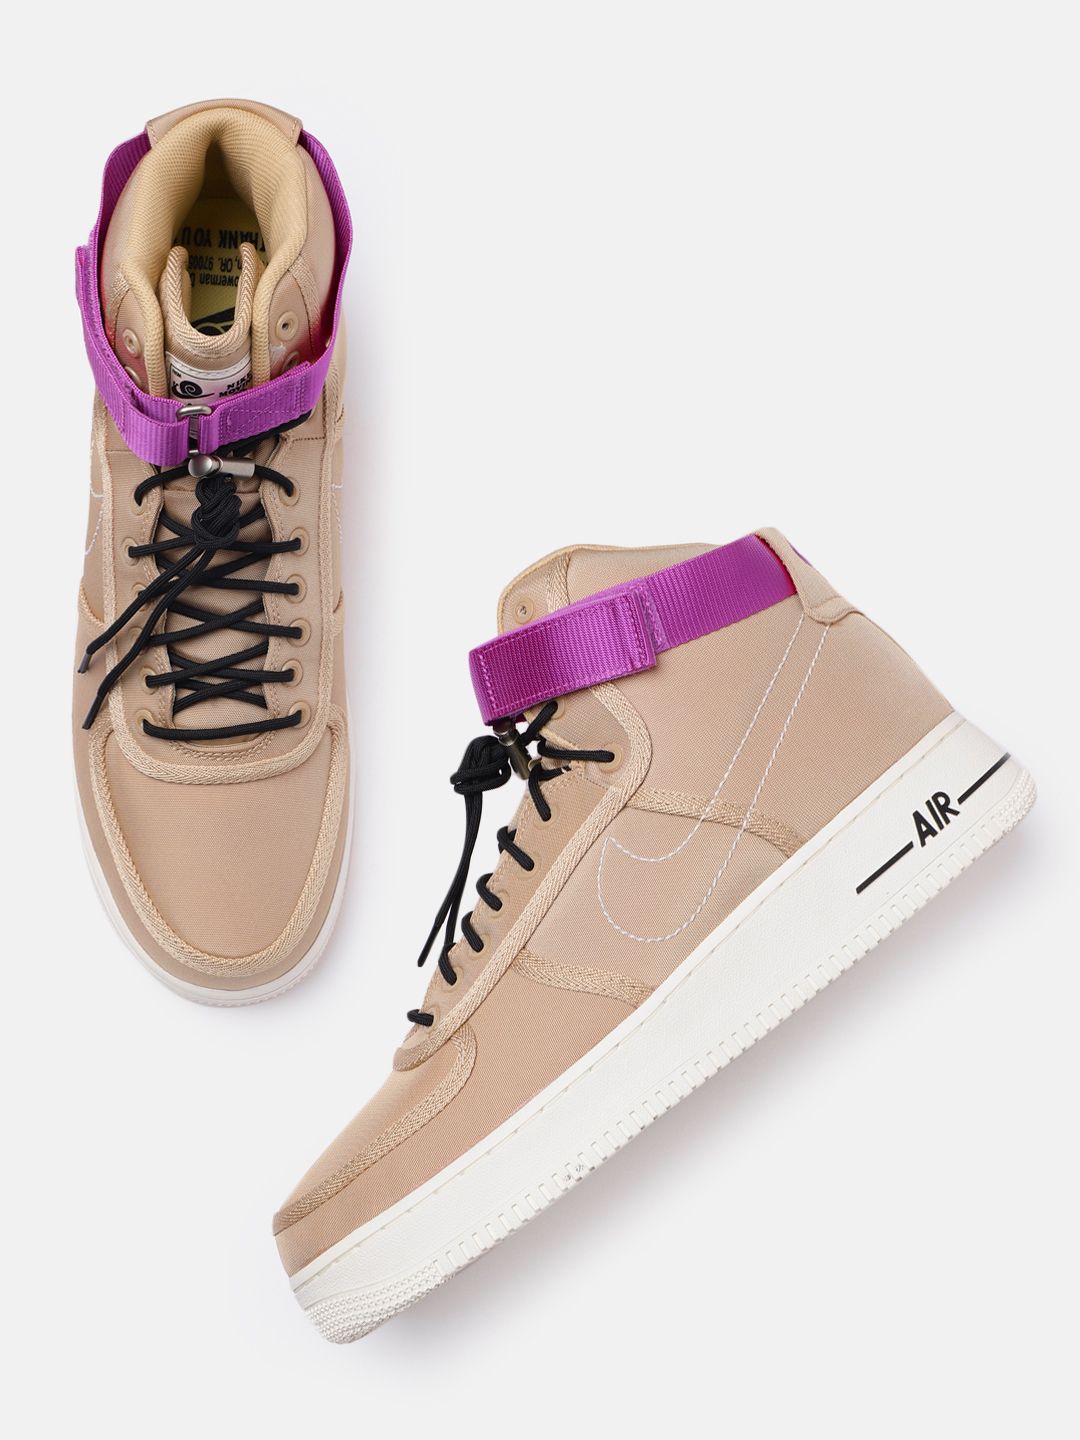 Nike Air Force 1 High '07 Lv8 Shoes In Brown, in Purple for Men